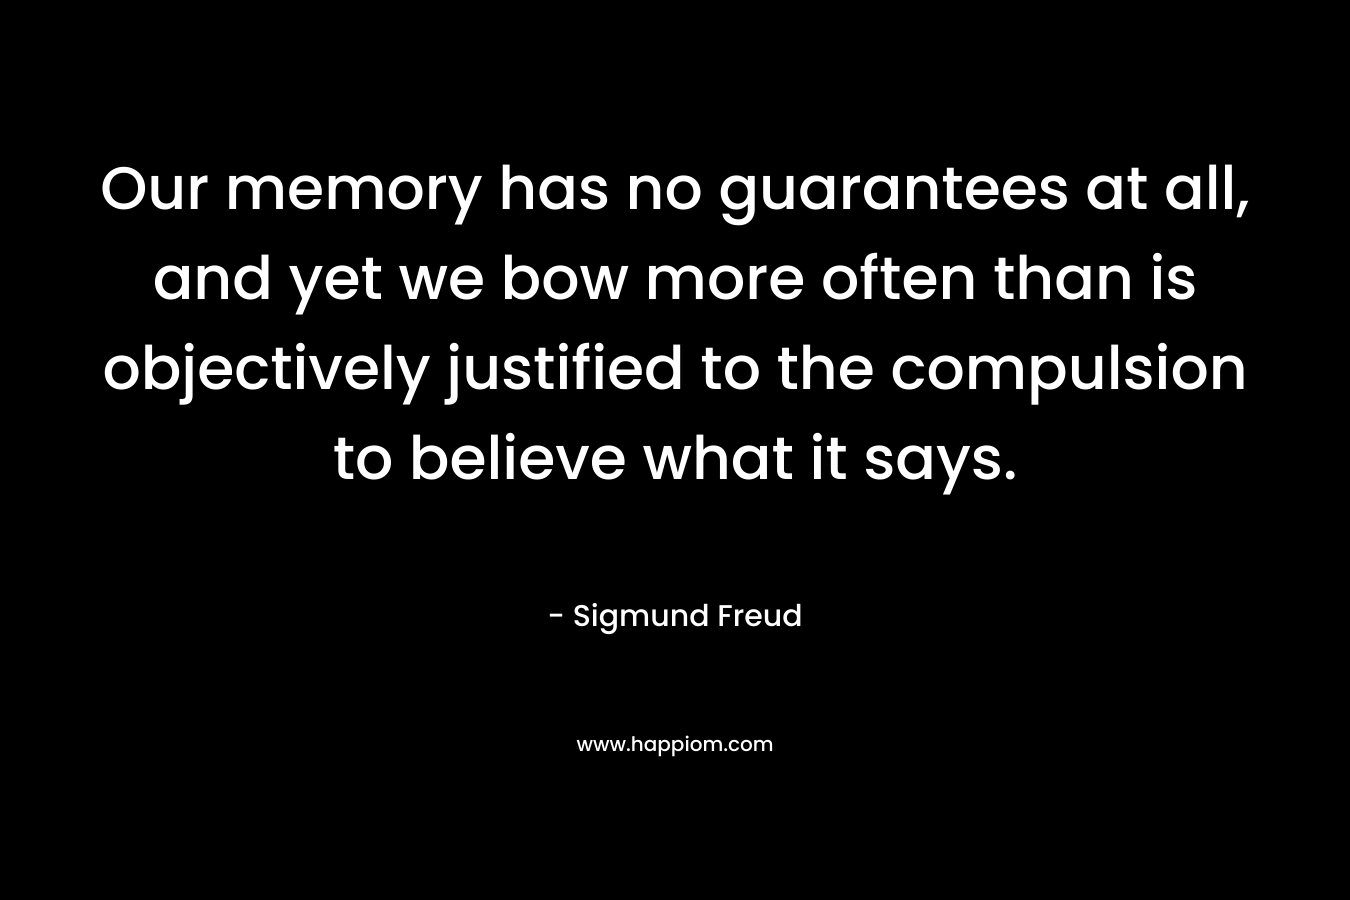 Our memory has no guarantees at all, and yet we bow more often than is objectively justified to the compulsion to believe what it says. – Sigmund Freud